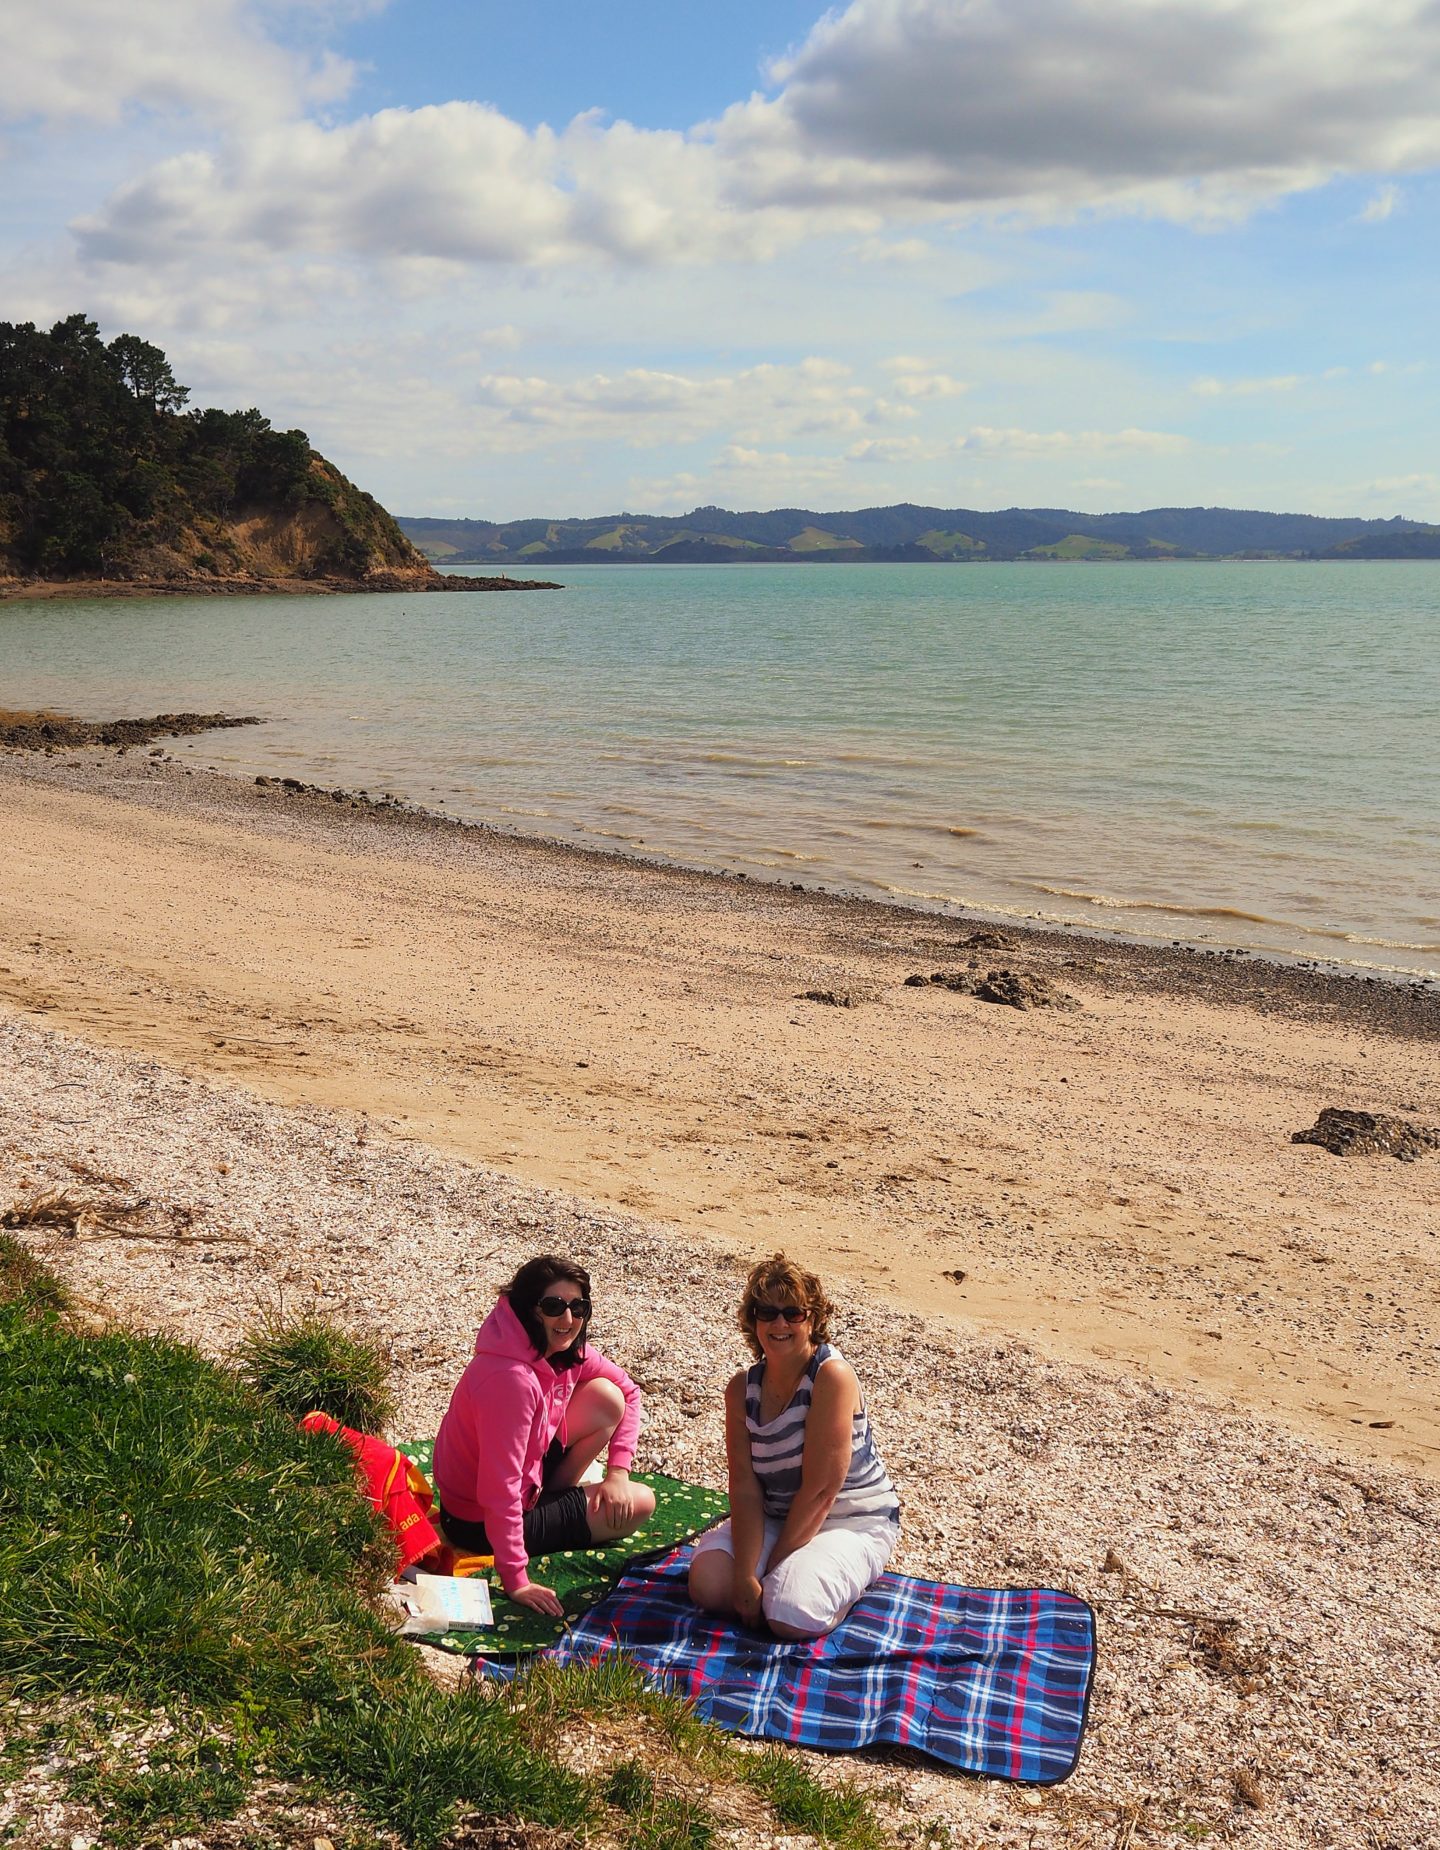 New Zealand Travel InspirationAn Autumn Picnic at Waitawa Regional Park, Auckland. Auckland is a fabulous city but you have to find the hidden gems that aren't in the travel guides. #newzealand #beautifuldestinations #auckland #aucklandnewzealand #80pairsofshoes #travel